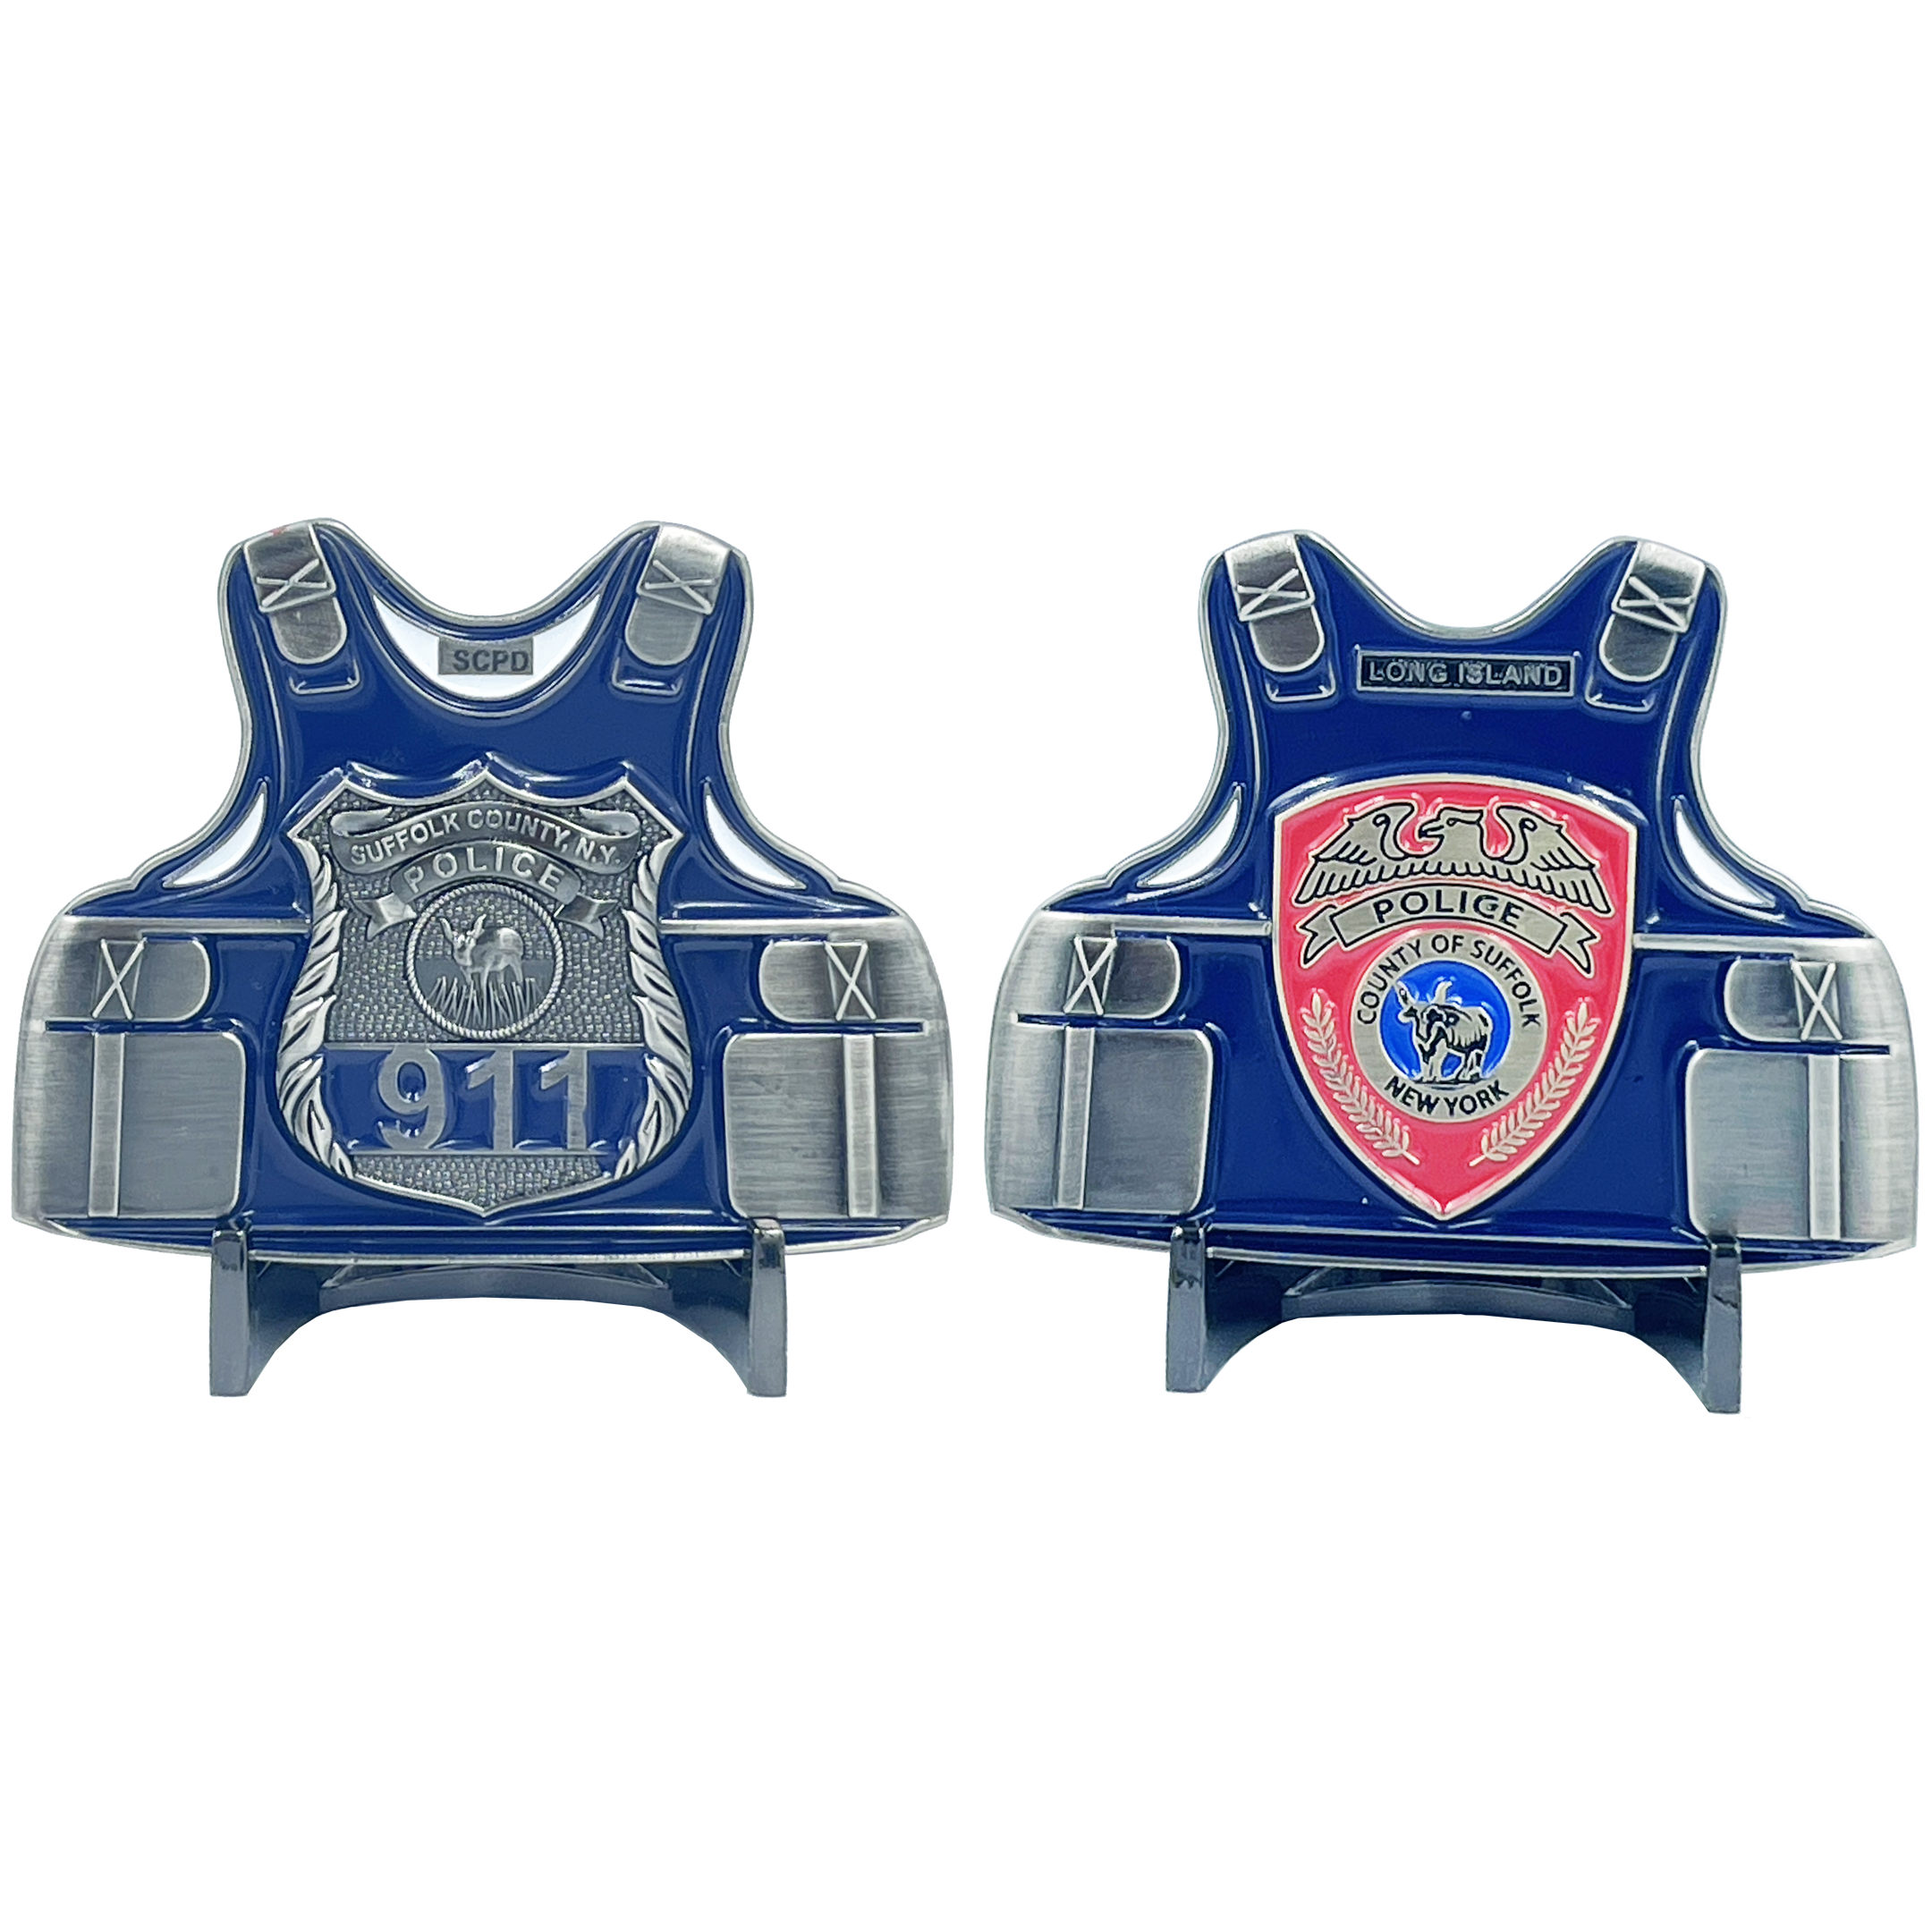 BL9-003 Suffolk County Police Department SCPD Long Island Police Officer Body Armor Challenge Coin